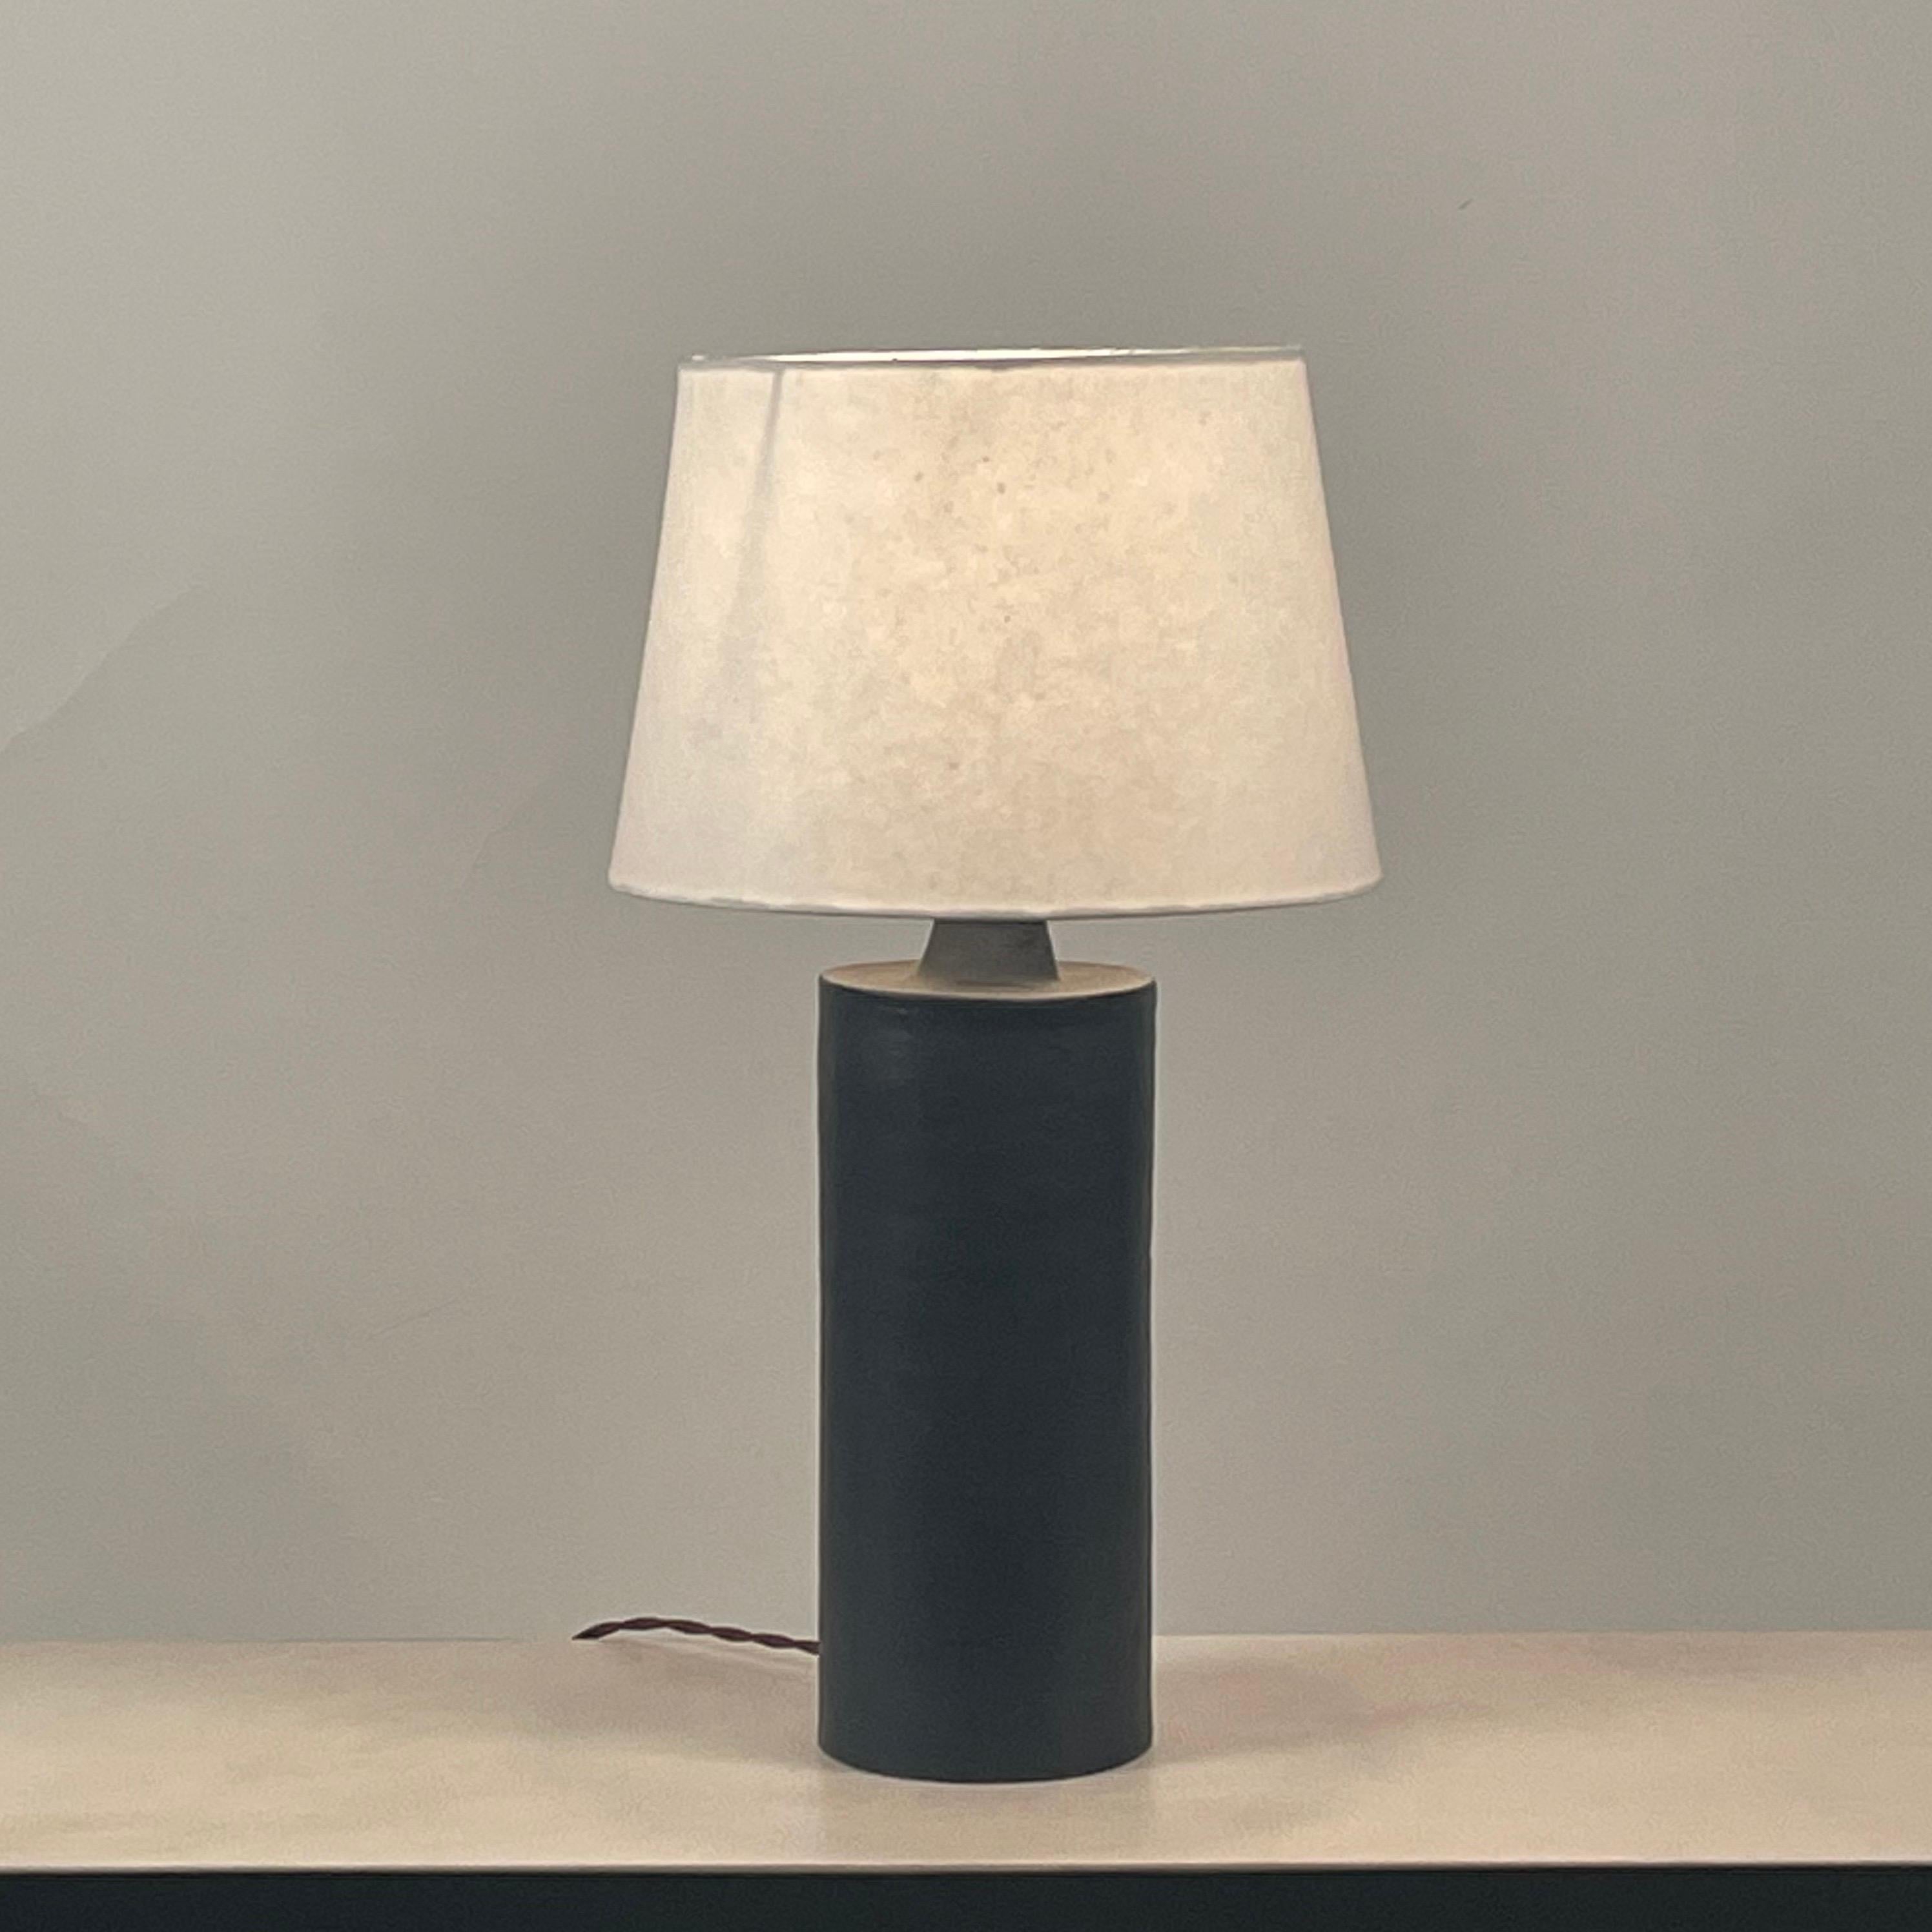 Perfect as bedside lamps, or where a smaller, understated pair of lamps is desired. Dimensions listed are the overall dimensions of the lamps with the shades.

The shades are 10 in. bottom diameter x 8 in. top diameter x 7 in. tall.